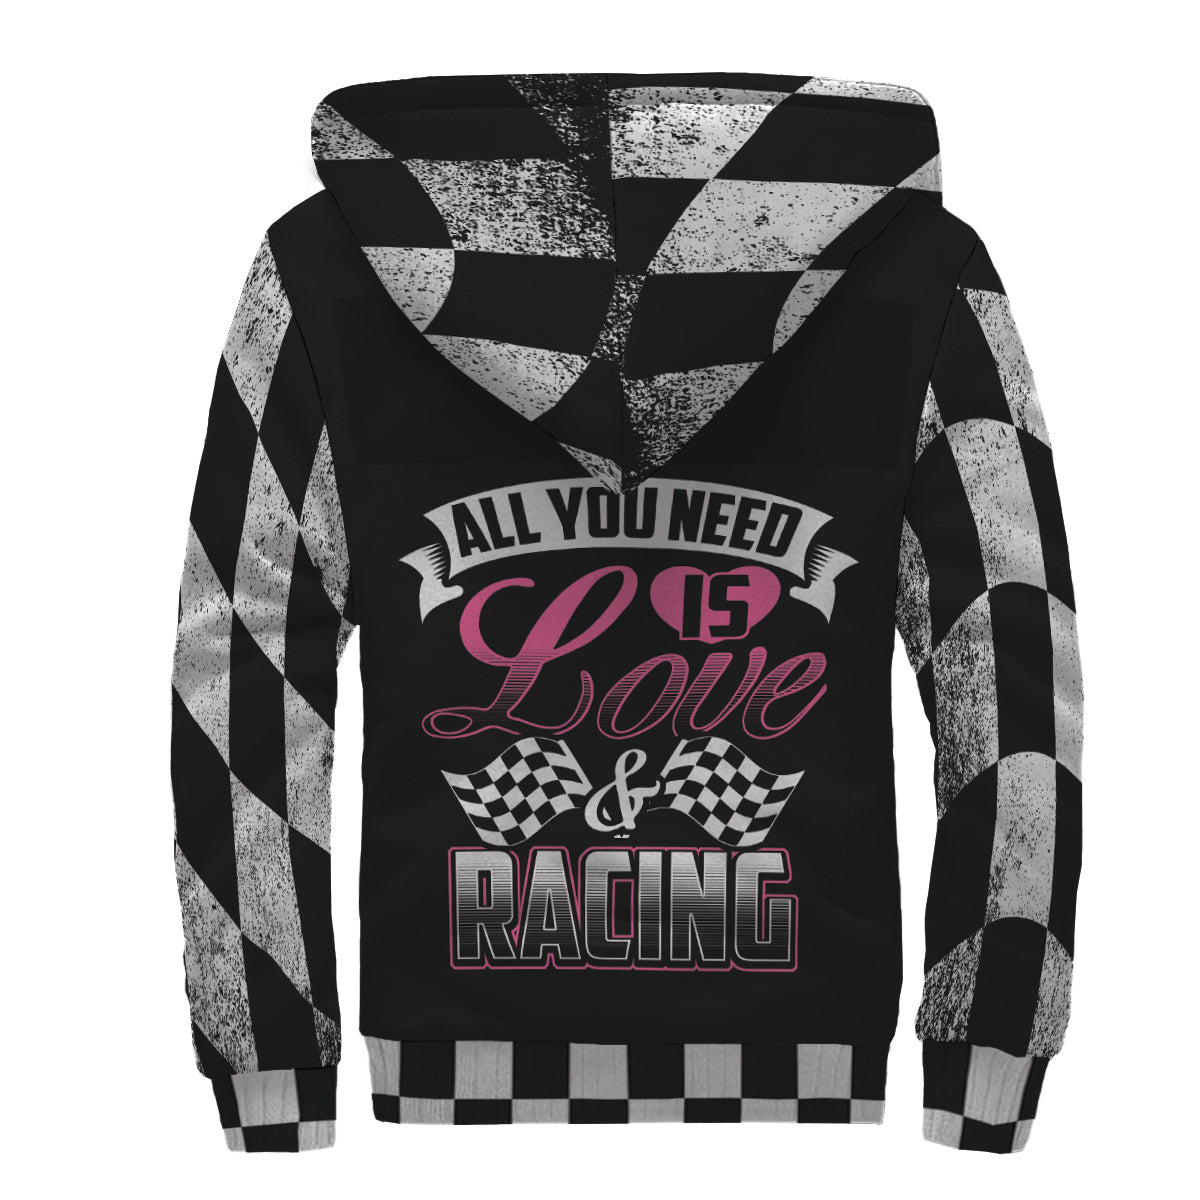 All You Need Is Love & Racing Sherpa Jacket